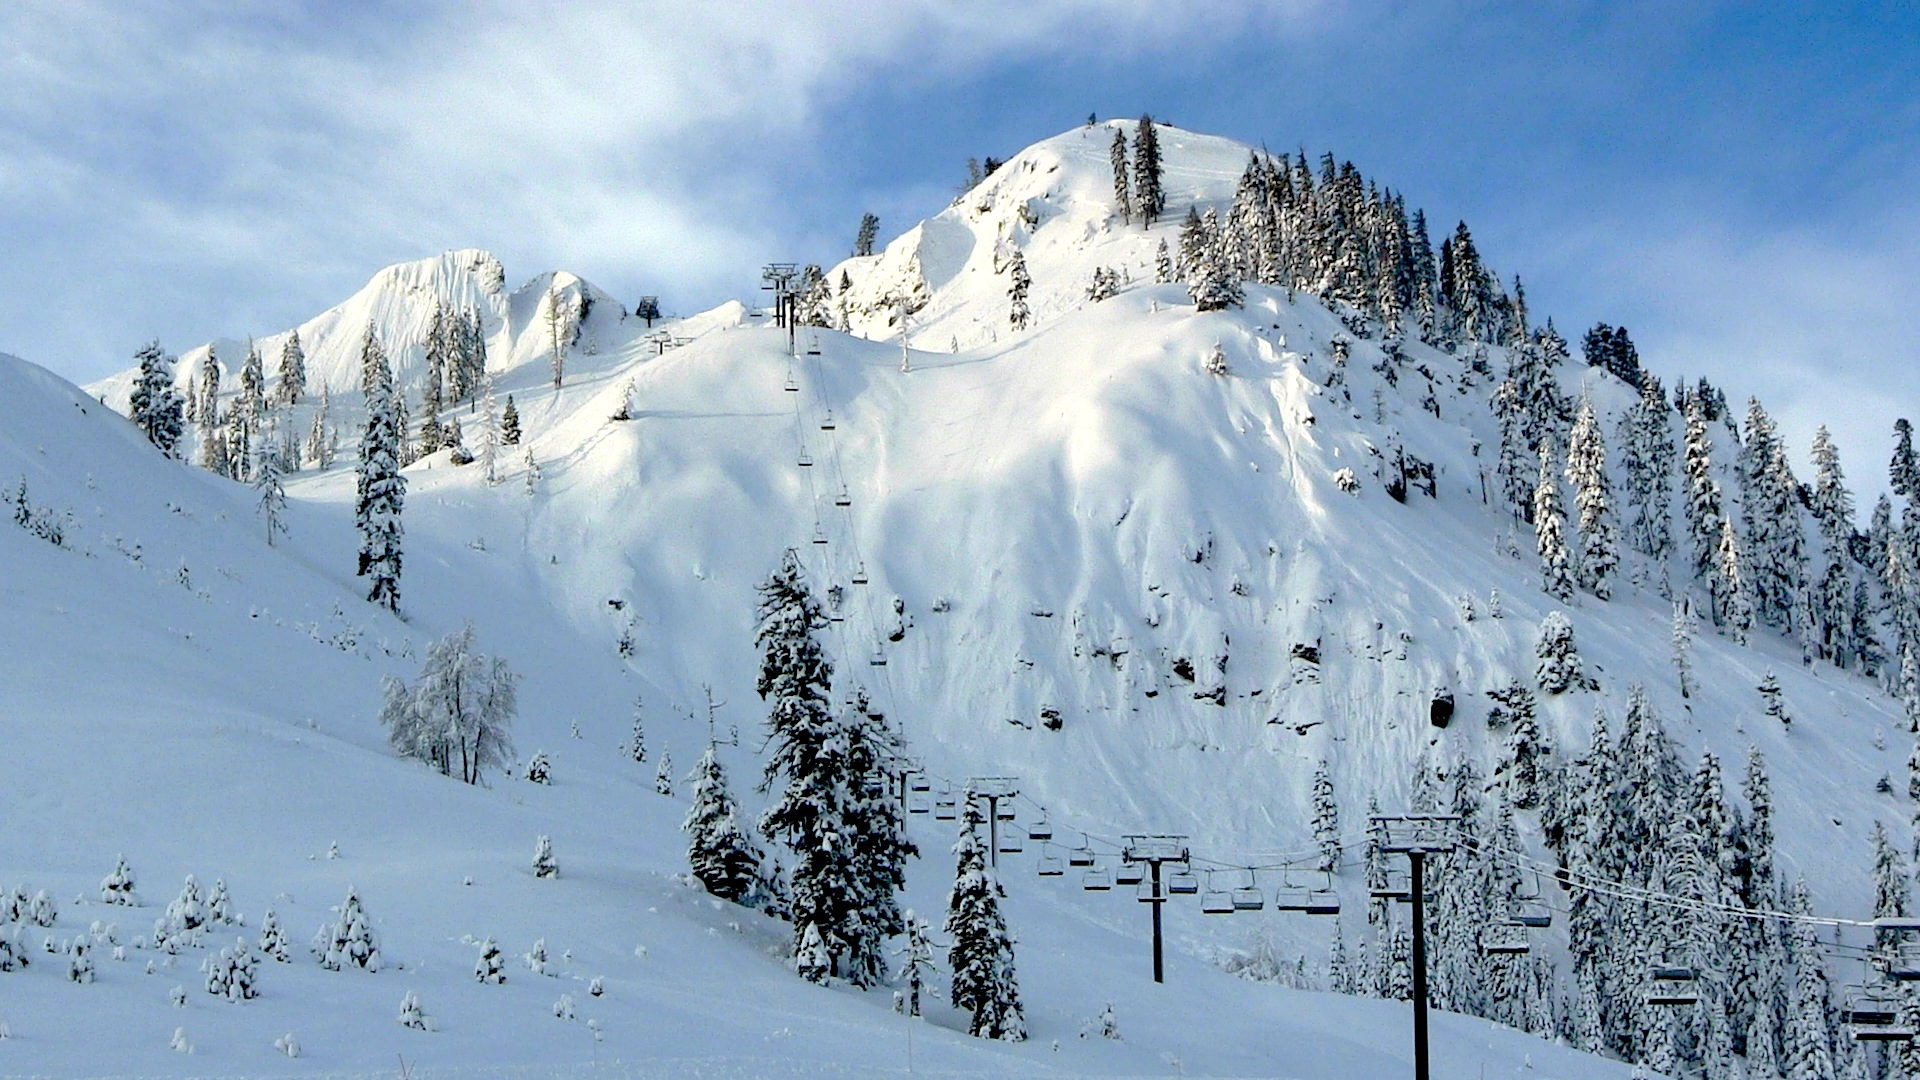 The Fingers of KT-22 at Squaw Valley, CA in March 2011. photo: snowbrains